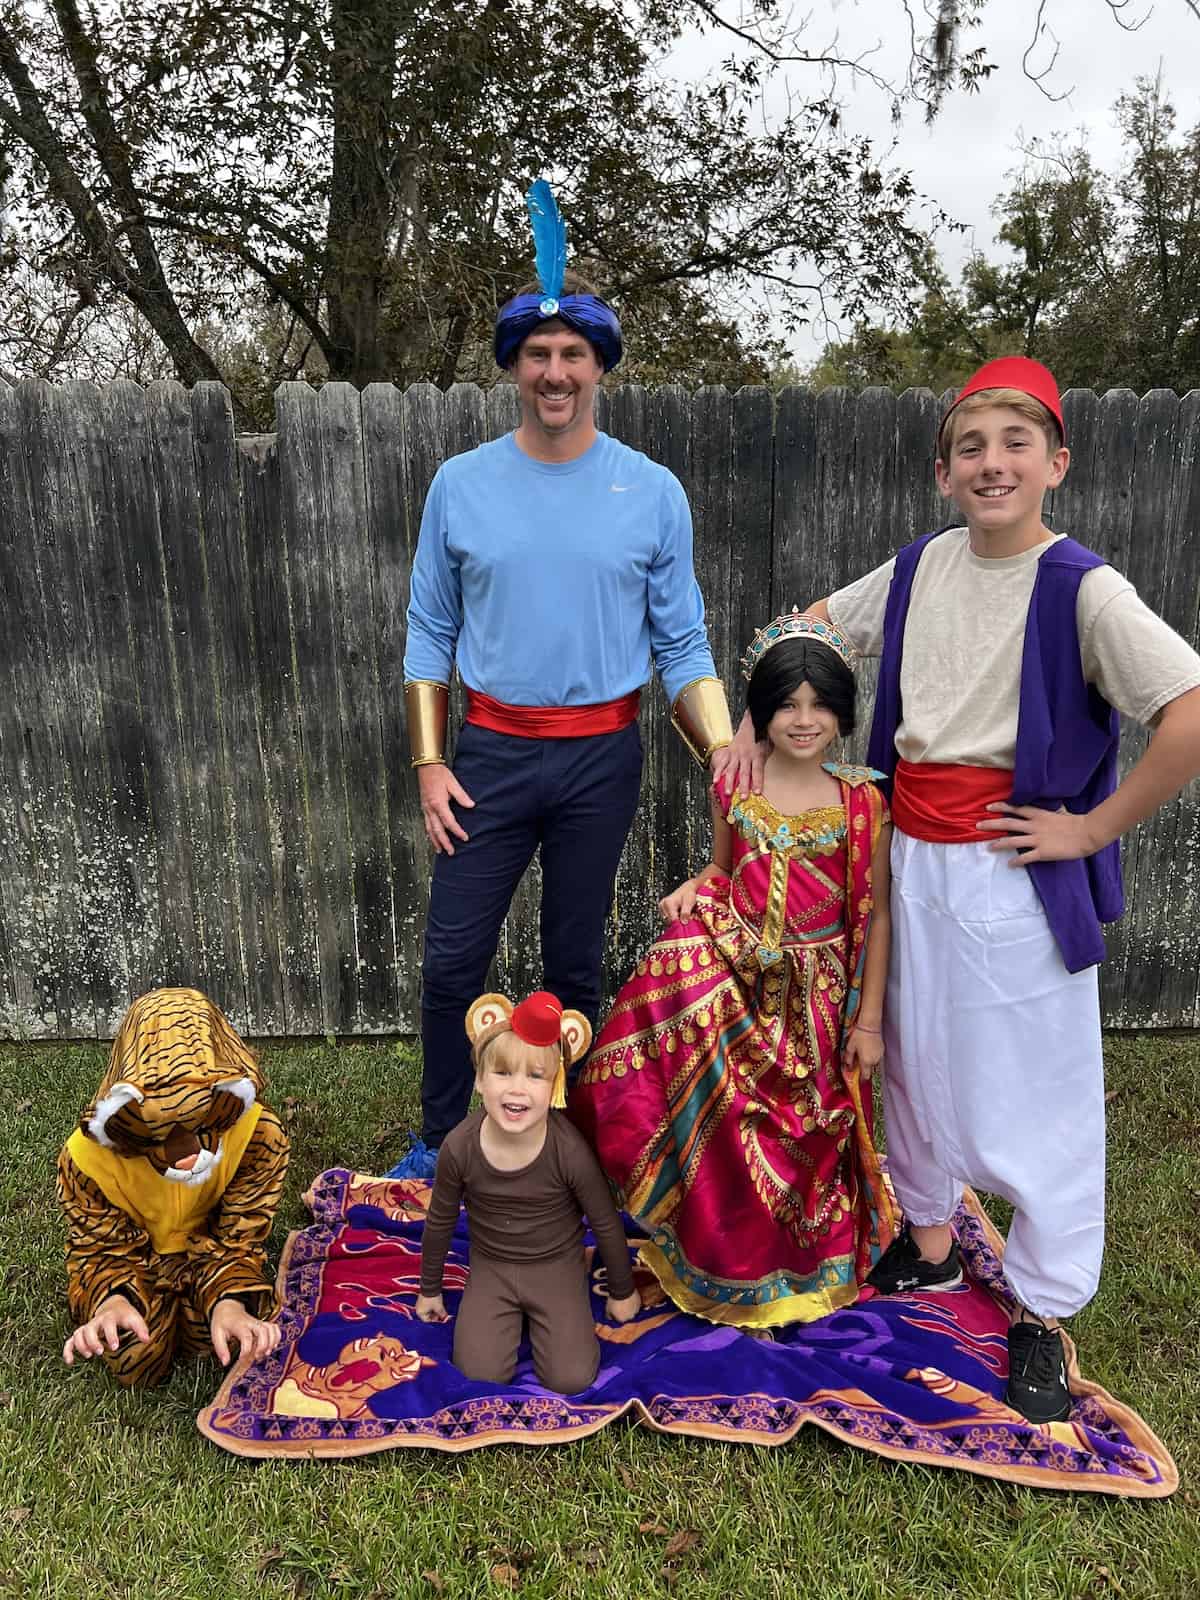 aladdin costumes for adults and kids 